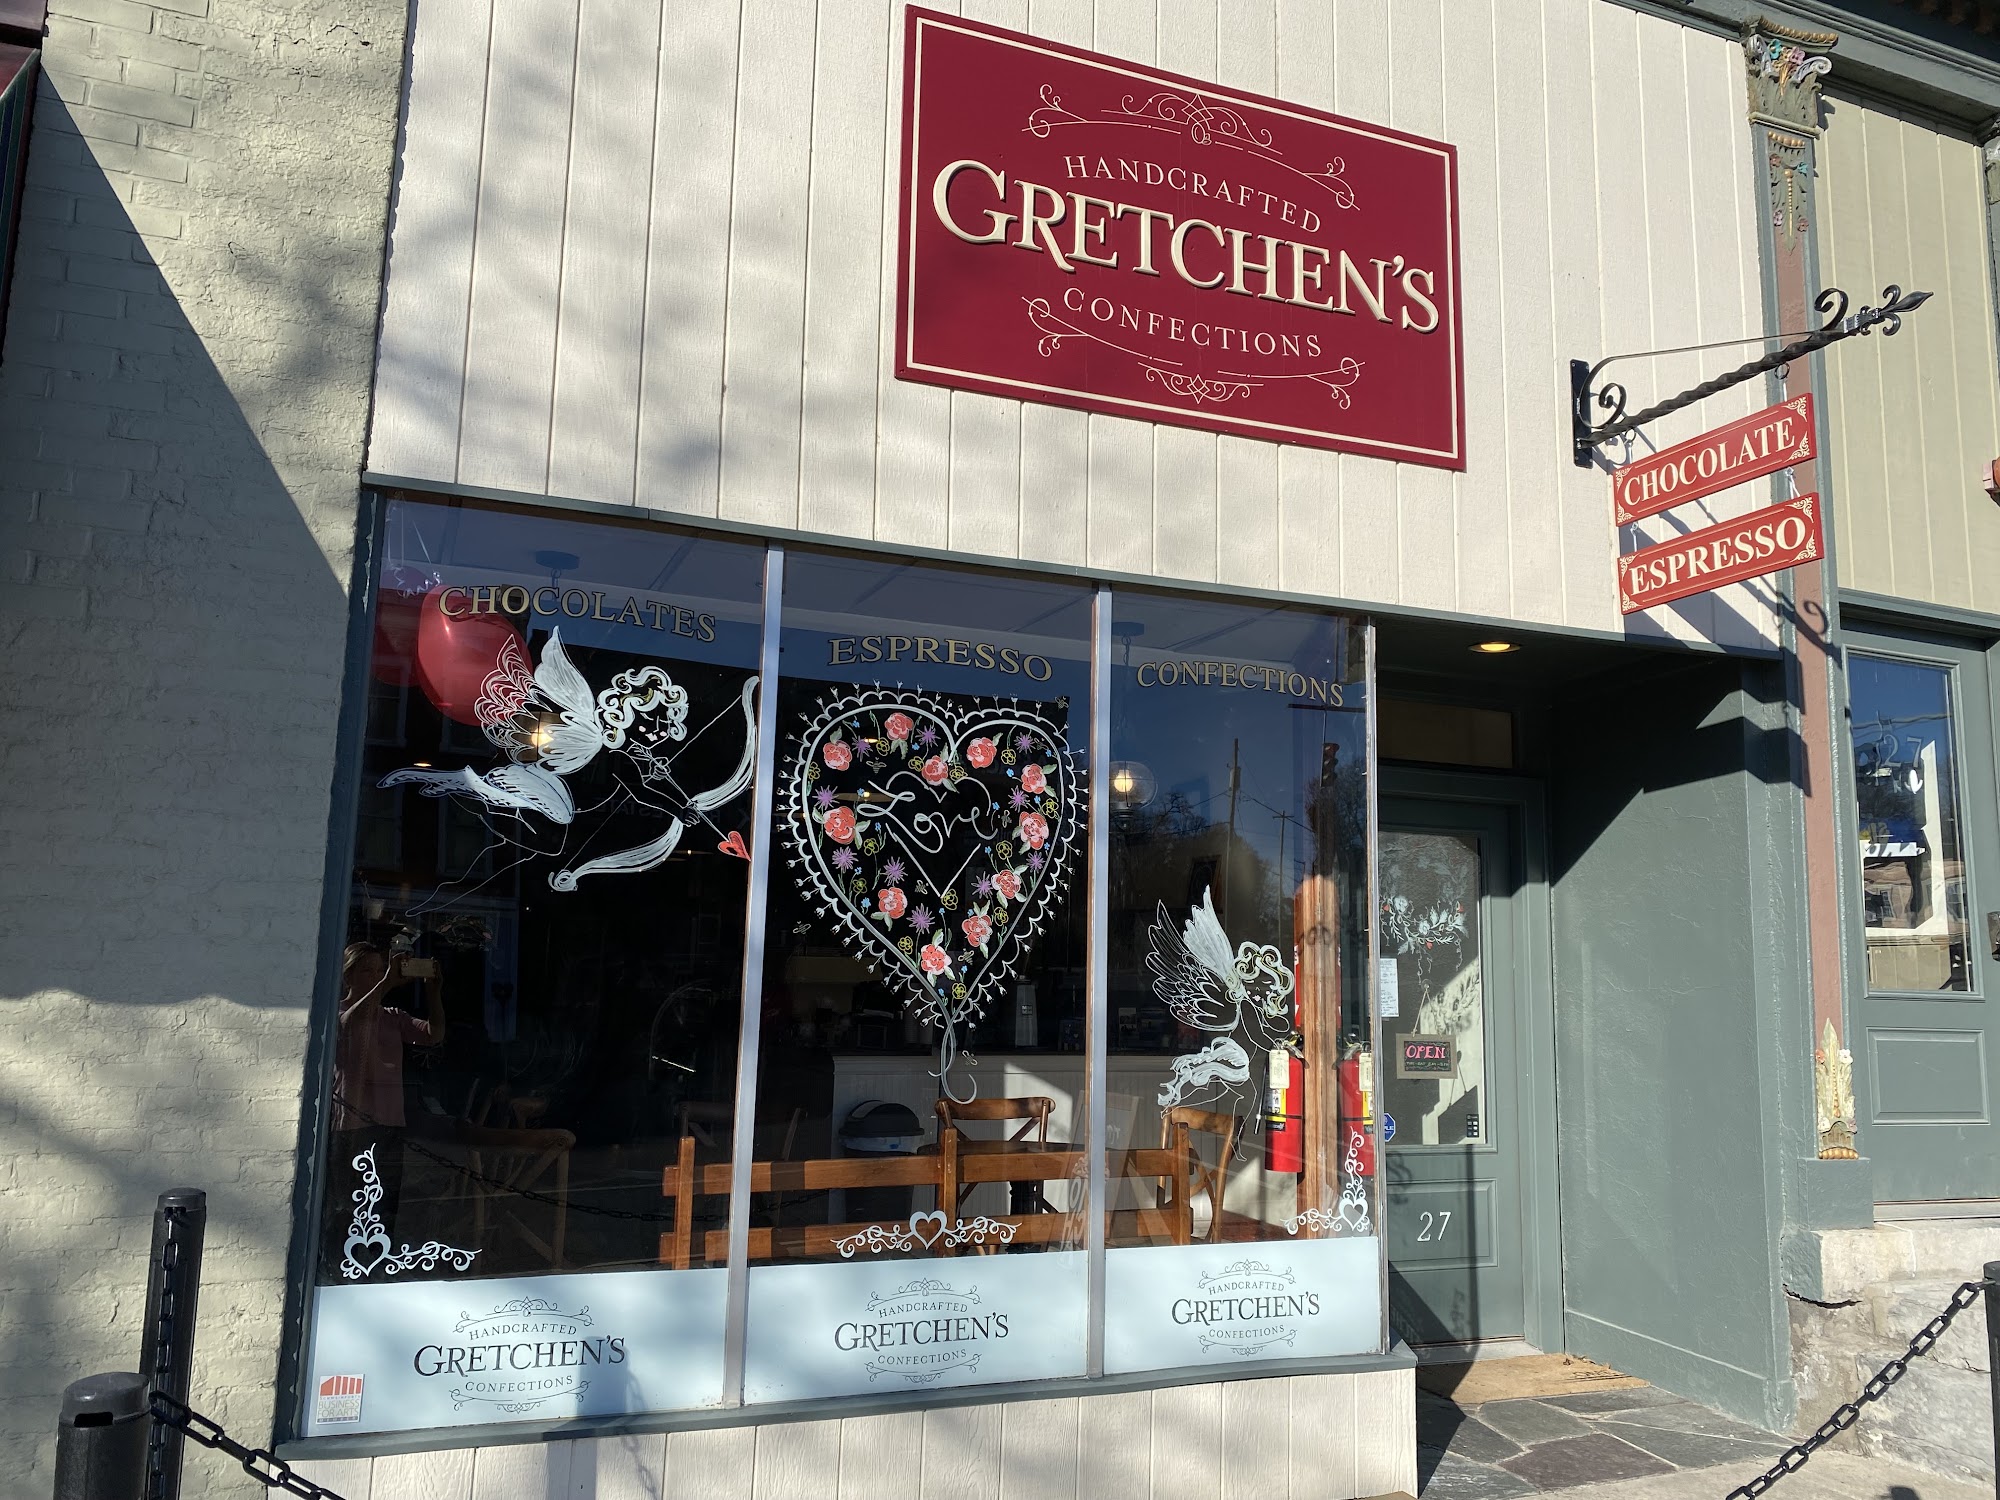 Gretchen's Confections and Cafe